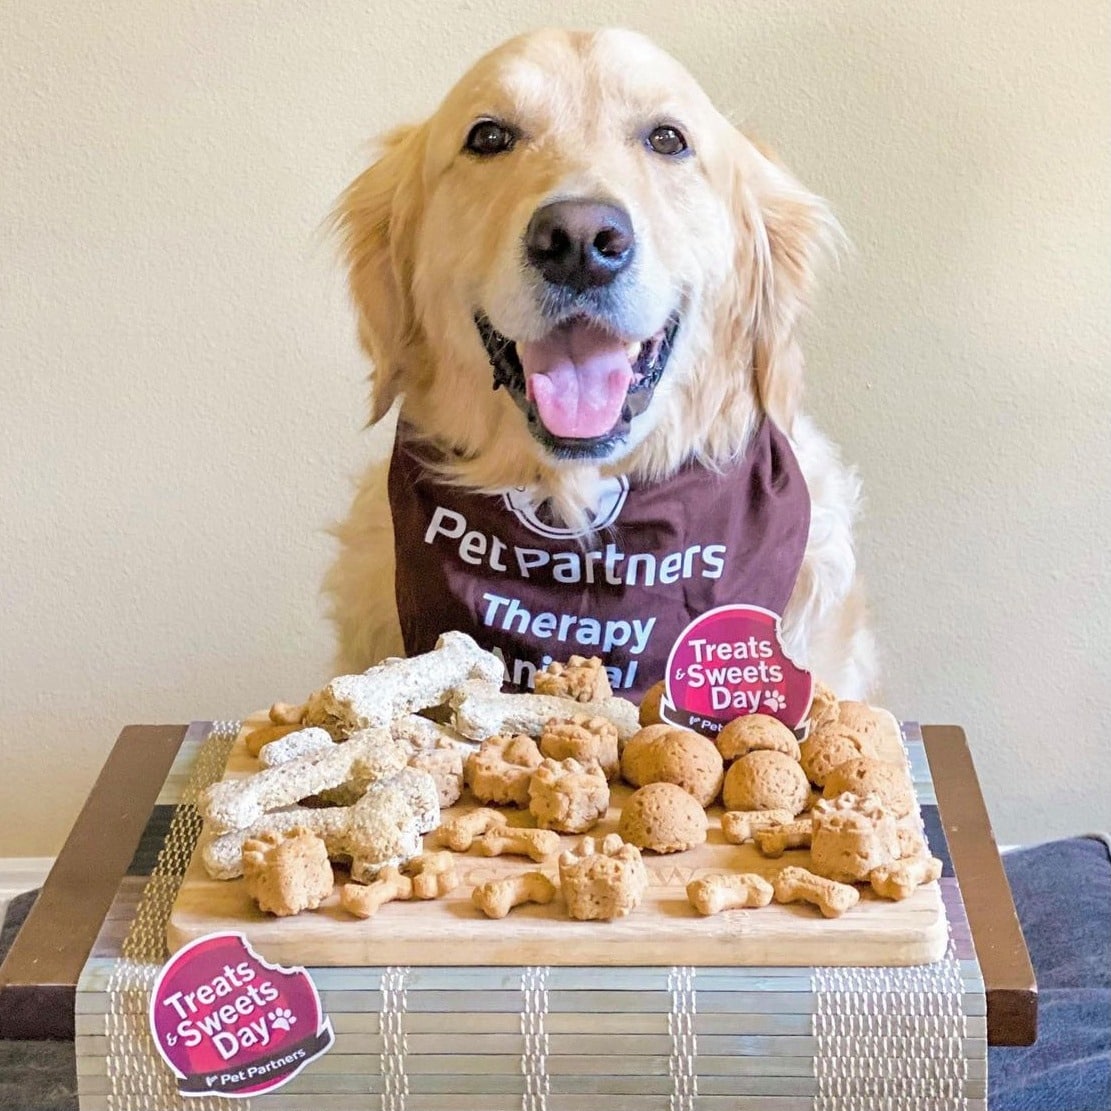 A golden retriever wearing a Pet Partners therapy animal bandanna with a box of treats for Treats & Sweets day in front of him.